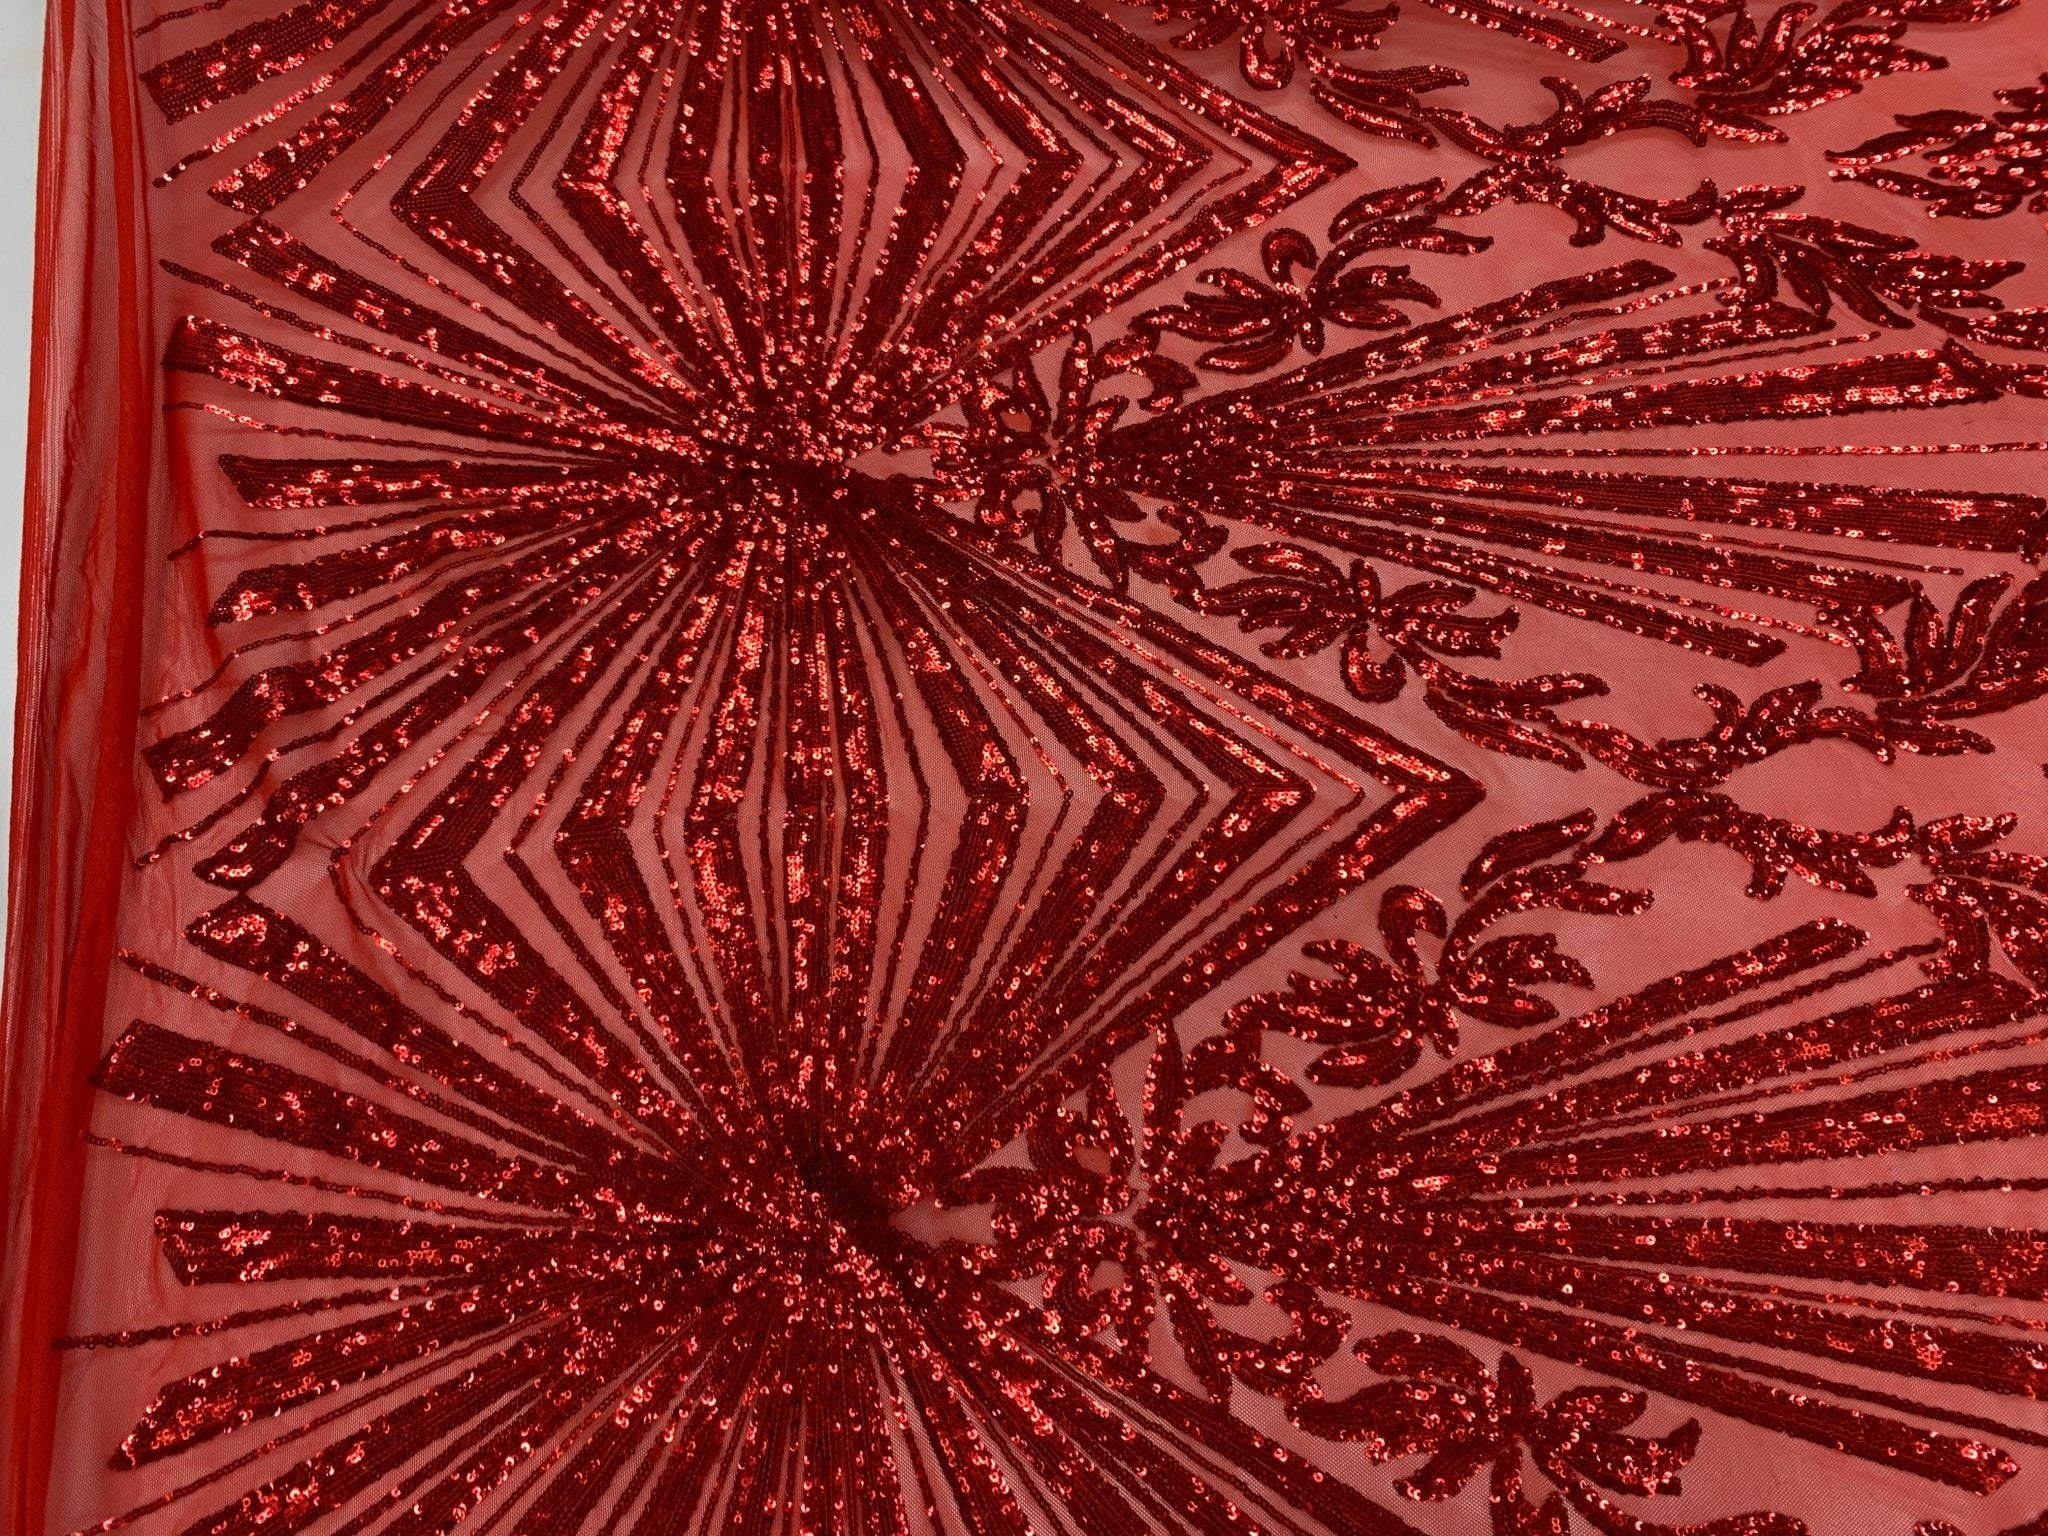 French Embroidery Stretch Sequins Fabric By The Yard on a Mesh LaceICEFABRICICE FABRICSRedFrench Embroidery Stretch Sequins Fabric By The Yard on a Mesh Lace ICEFABRIC Red